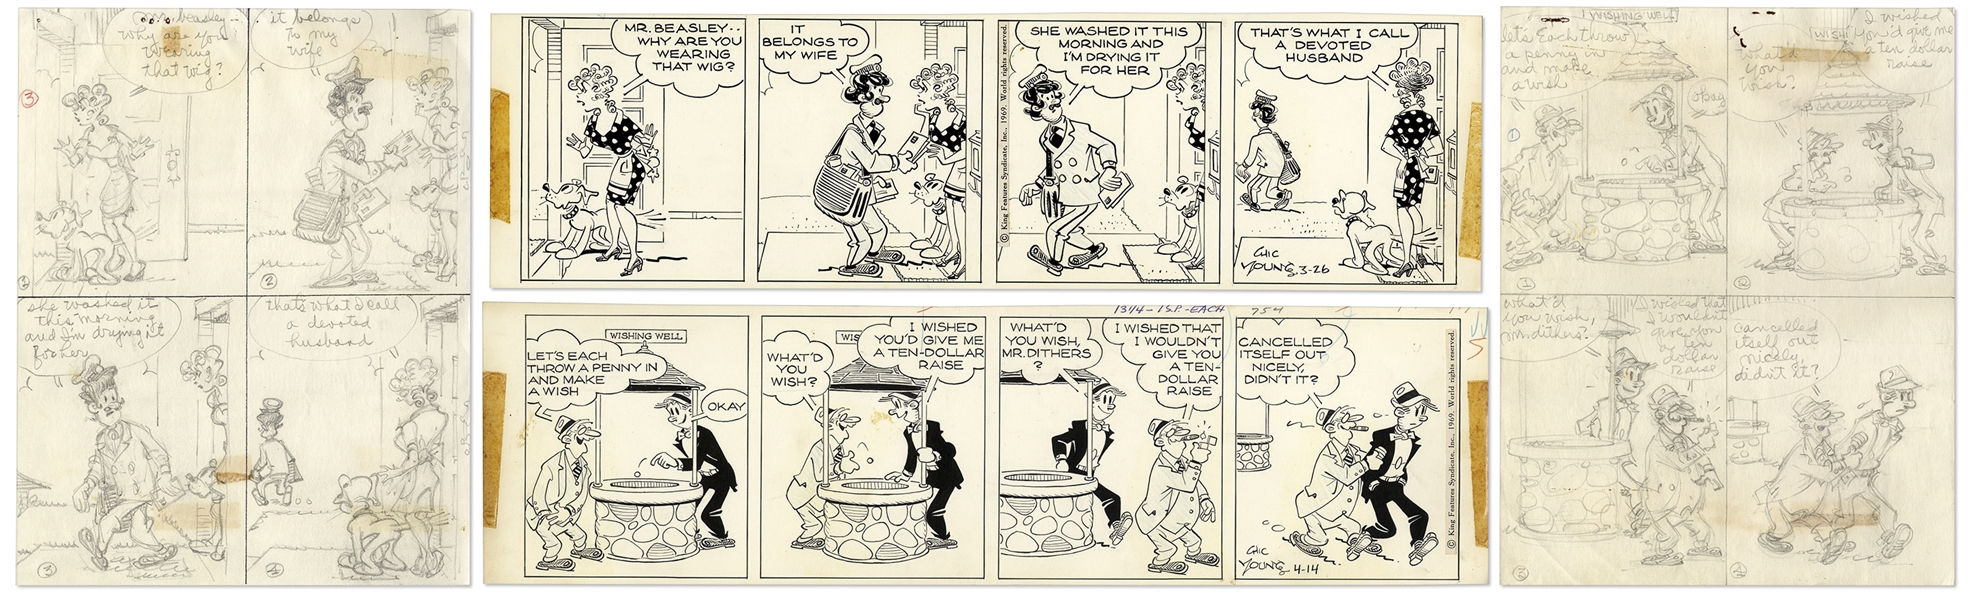 2 Chic Young Hand-Drawn ''Blondie'' Comic Strips From 1969 -- With Chic Young's Original Artwork for Both